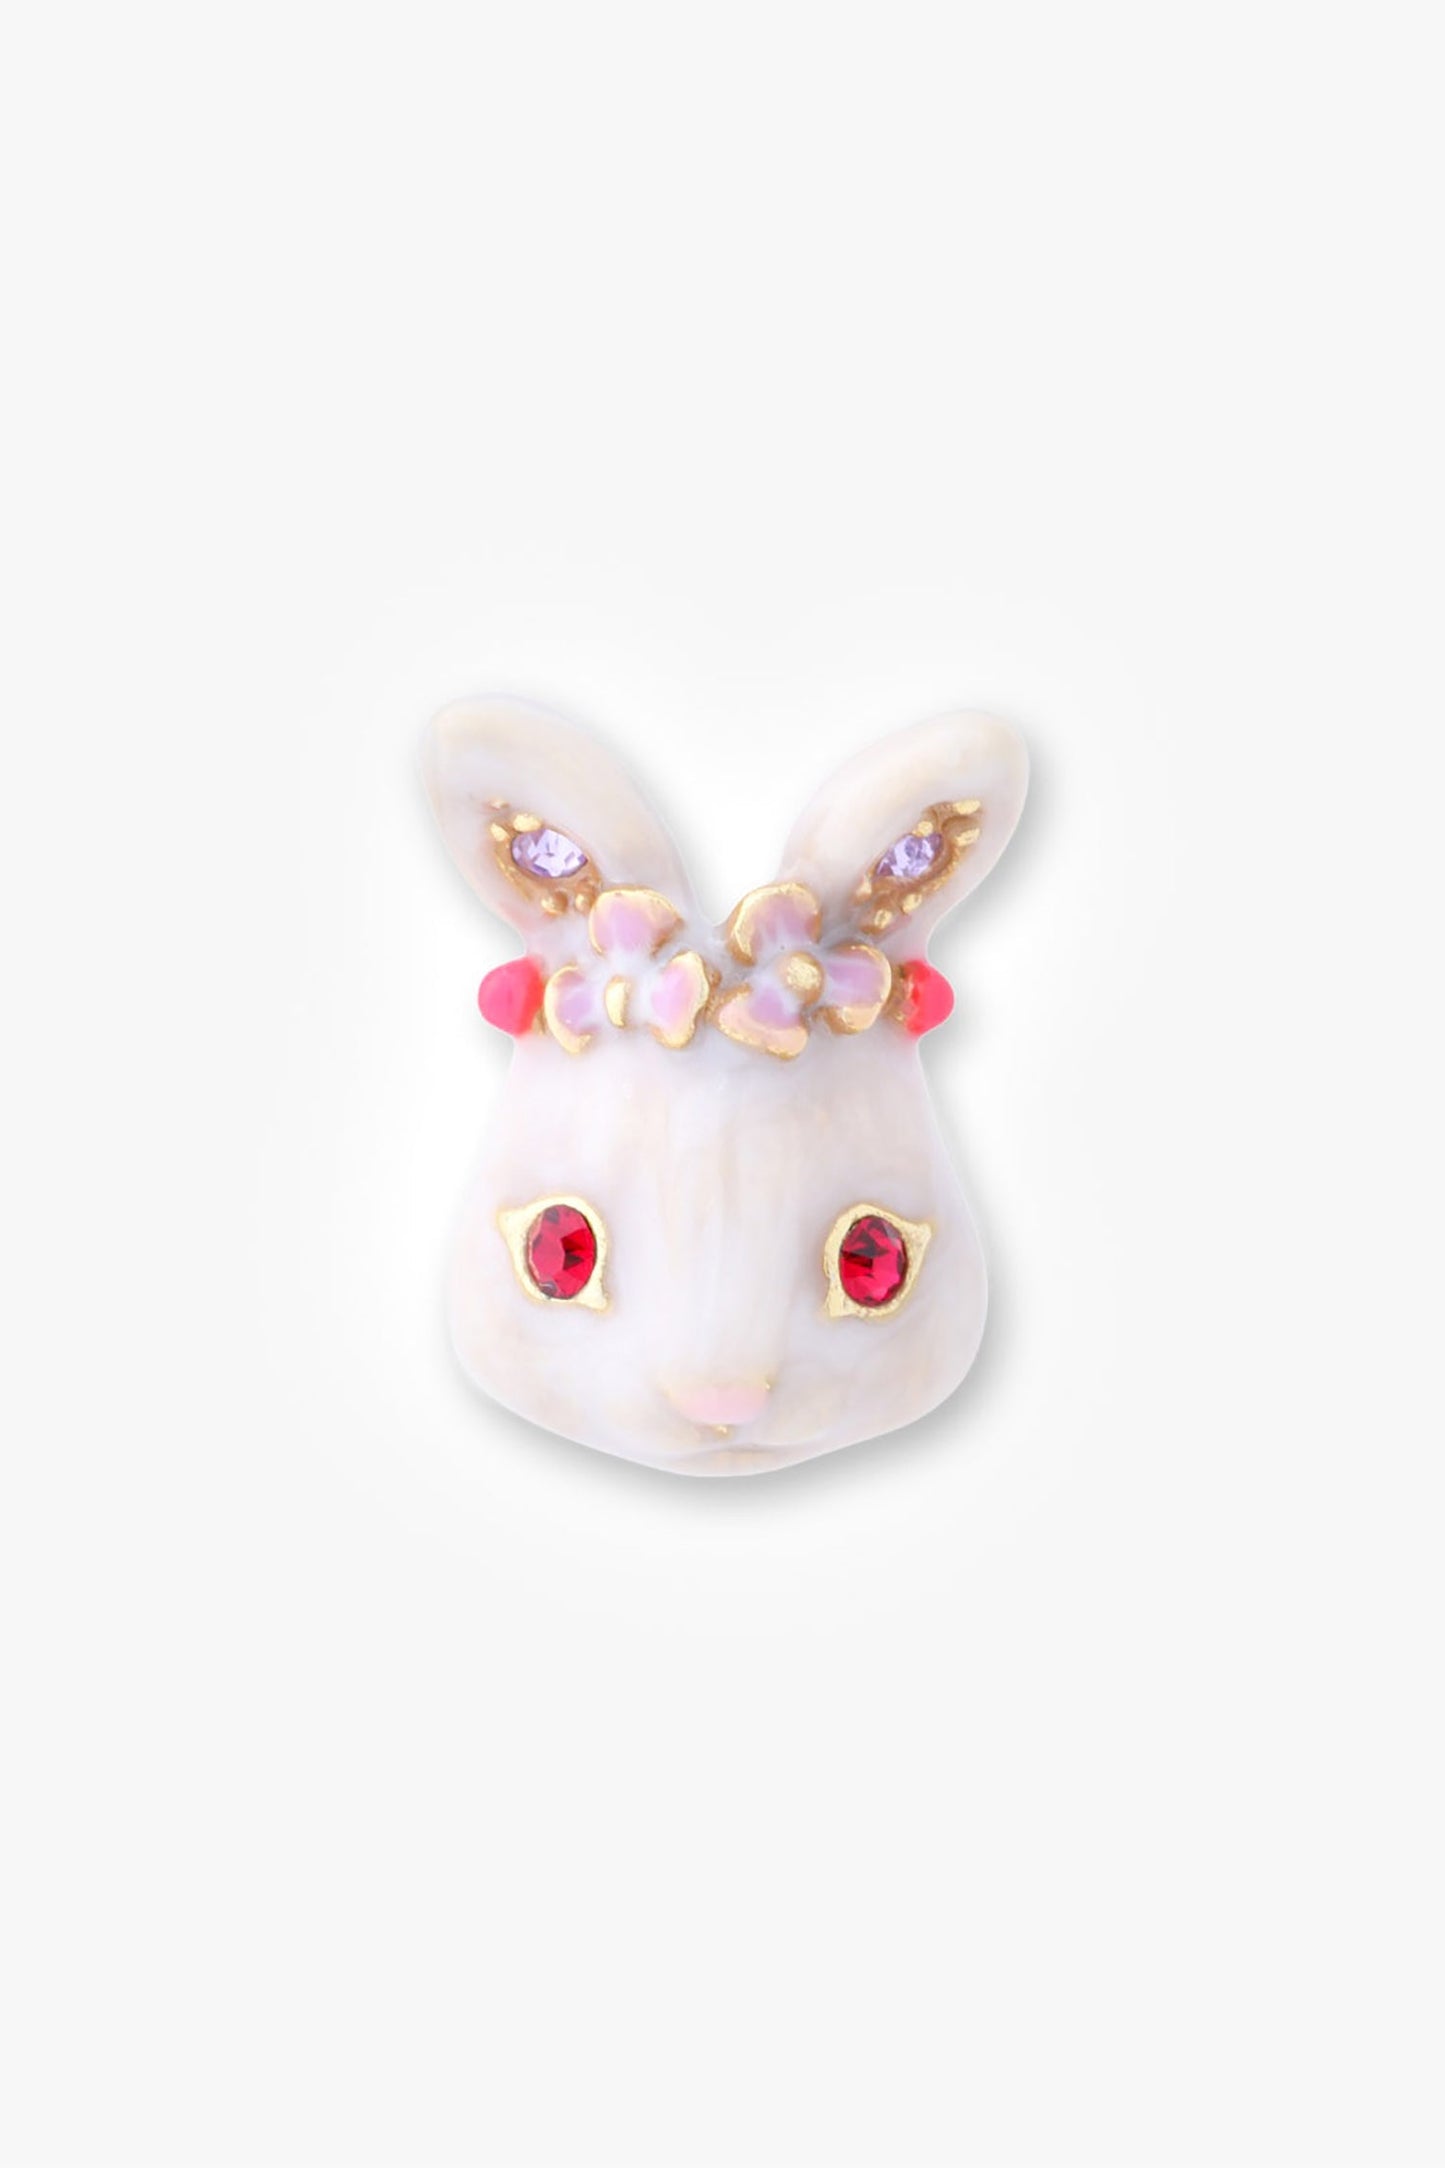 Detail of one white enamel rabbit charm with red eye gems, purple ear gems, and red crown